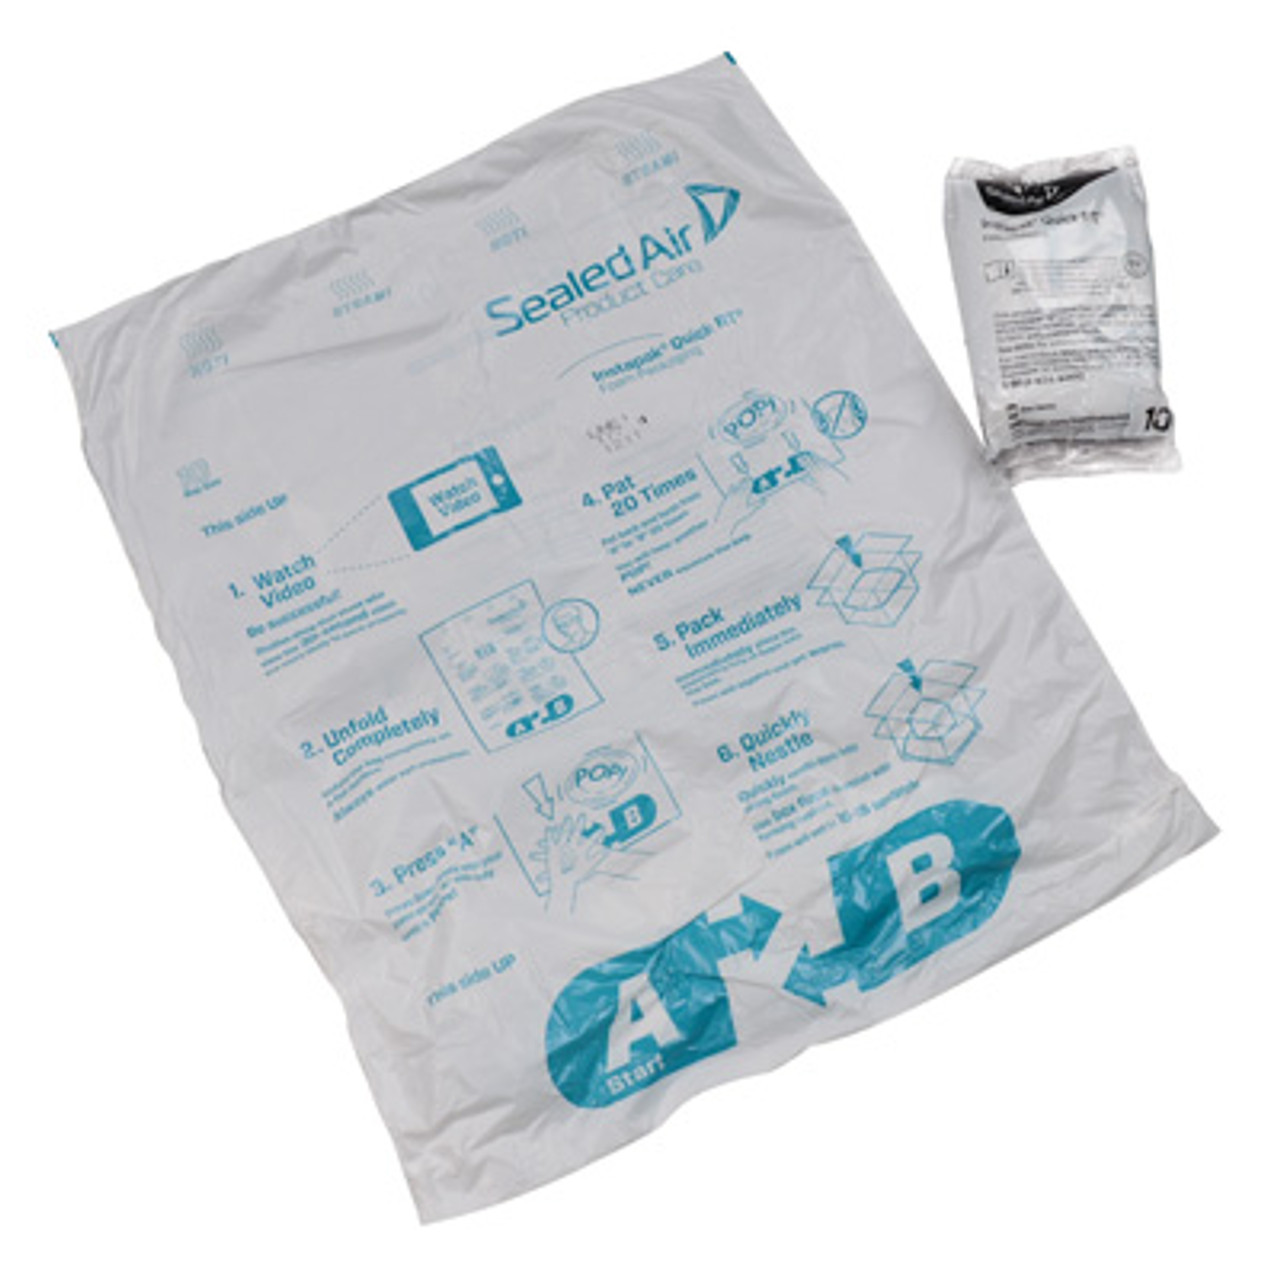 Sealed Air Instapak Quick Room Temperature Foam Packaging Bags (Sold by the carton)